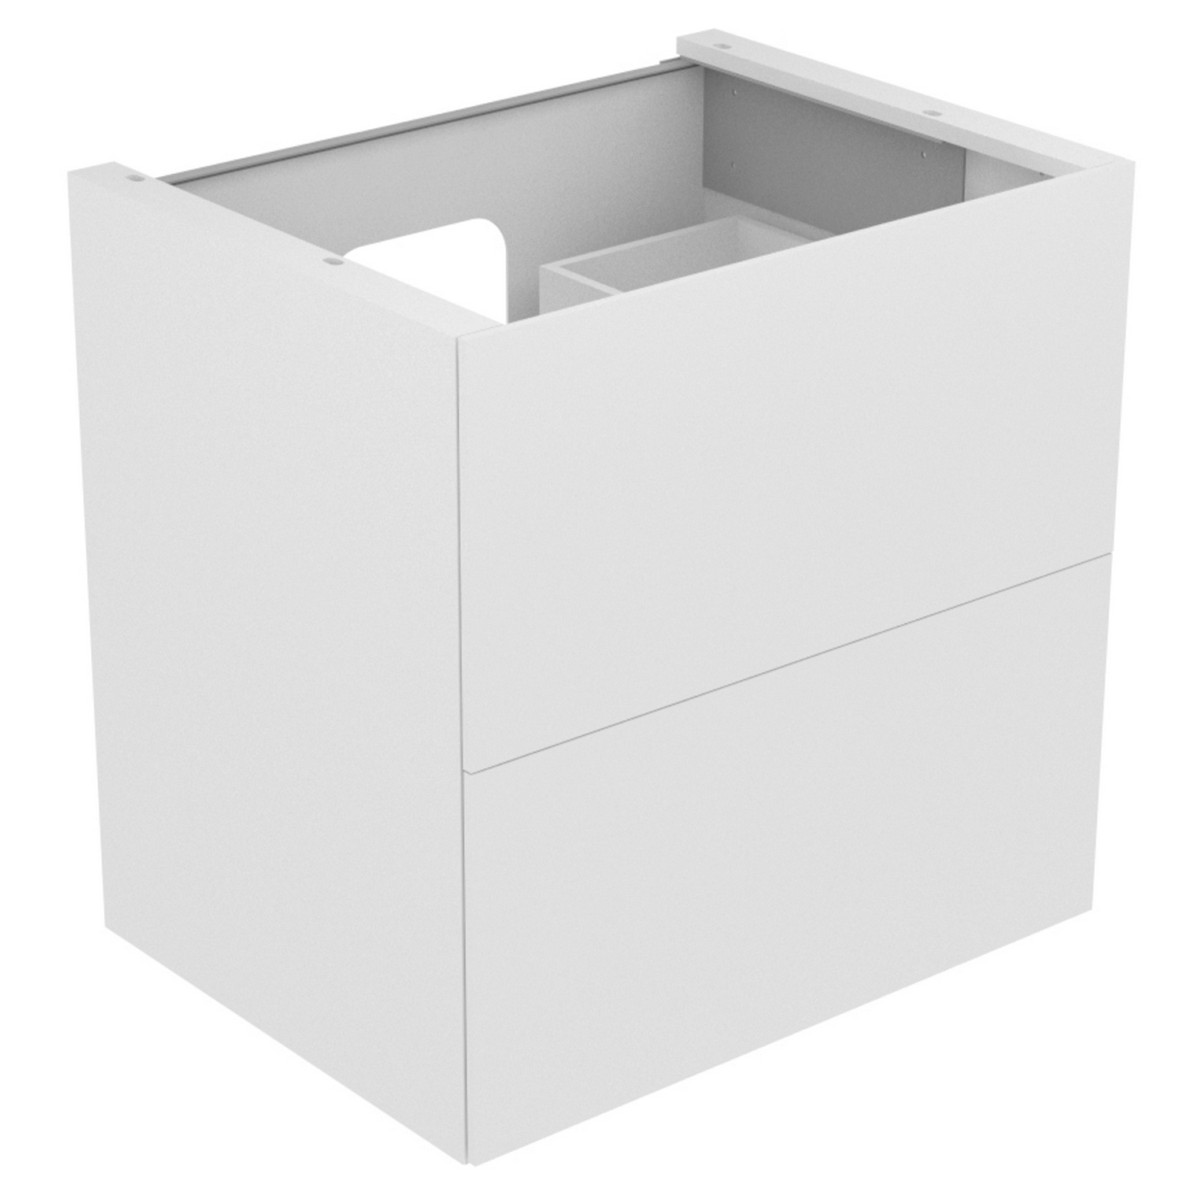 KEUCO 3134200 EDITION 11 27 1/2 INCH 2-DRAWERS WALL MOUNTED SINGLE SINK BATHROOM VANITY CABINET ONLY